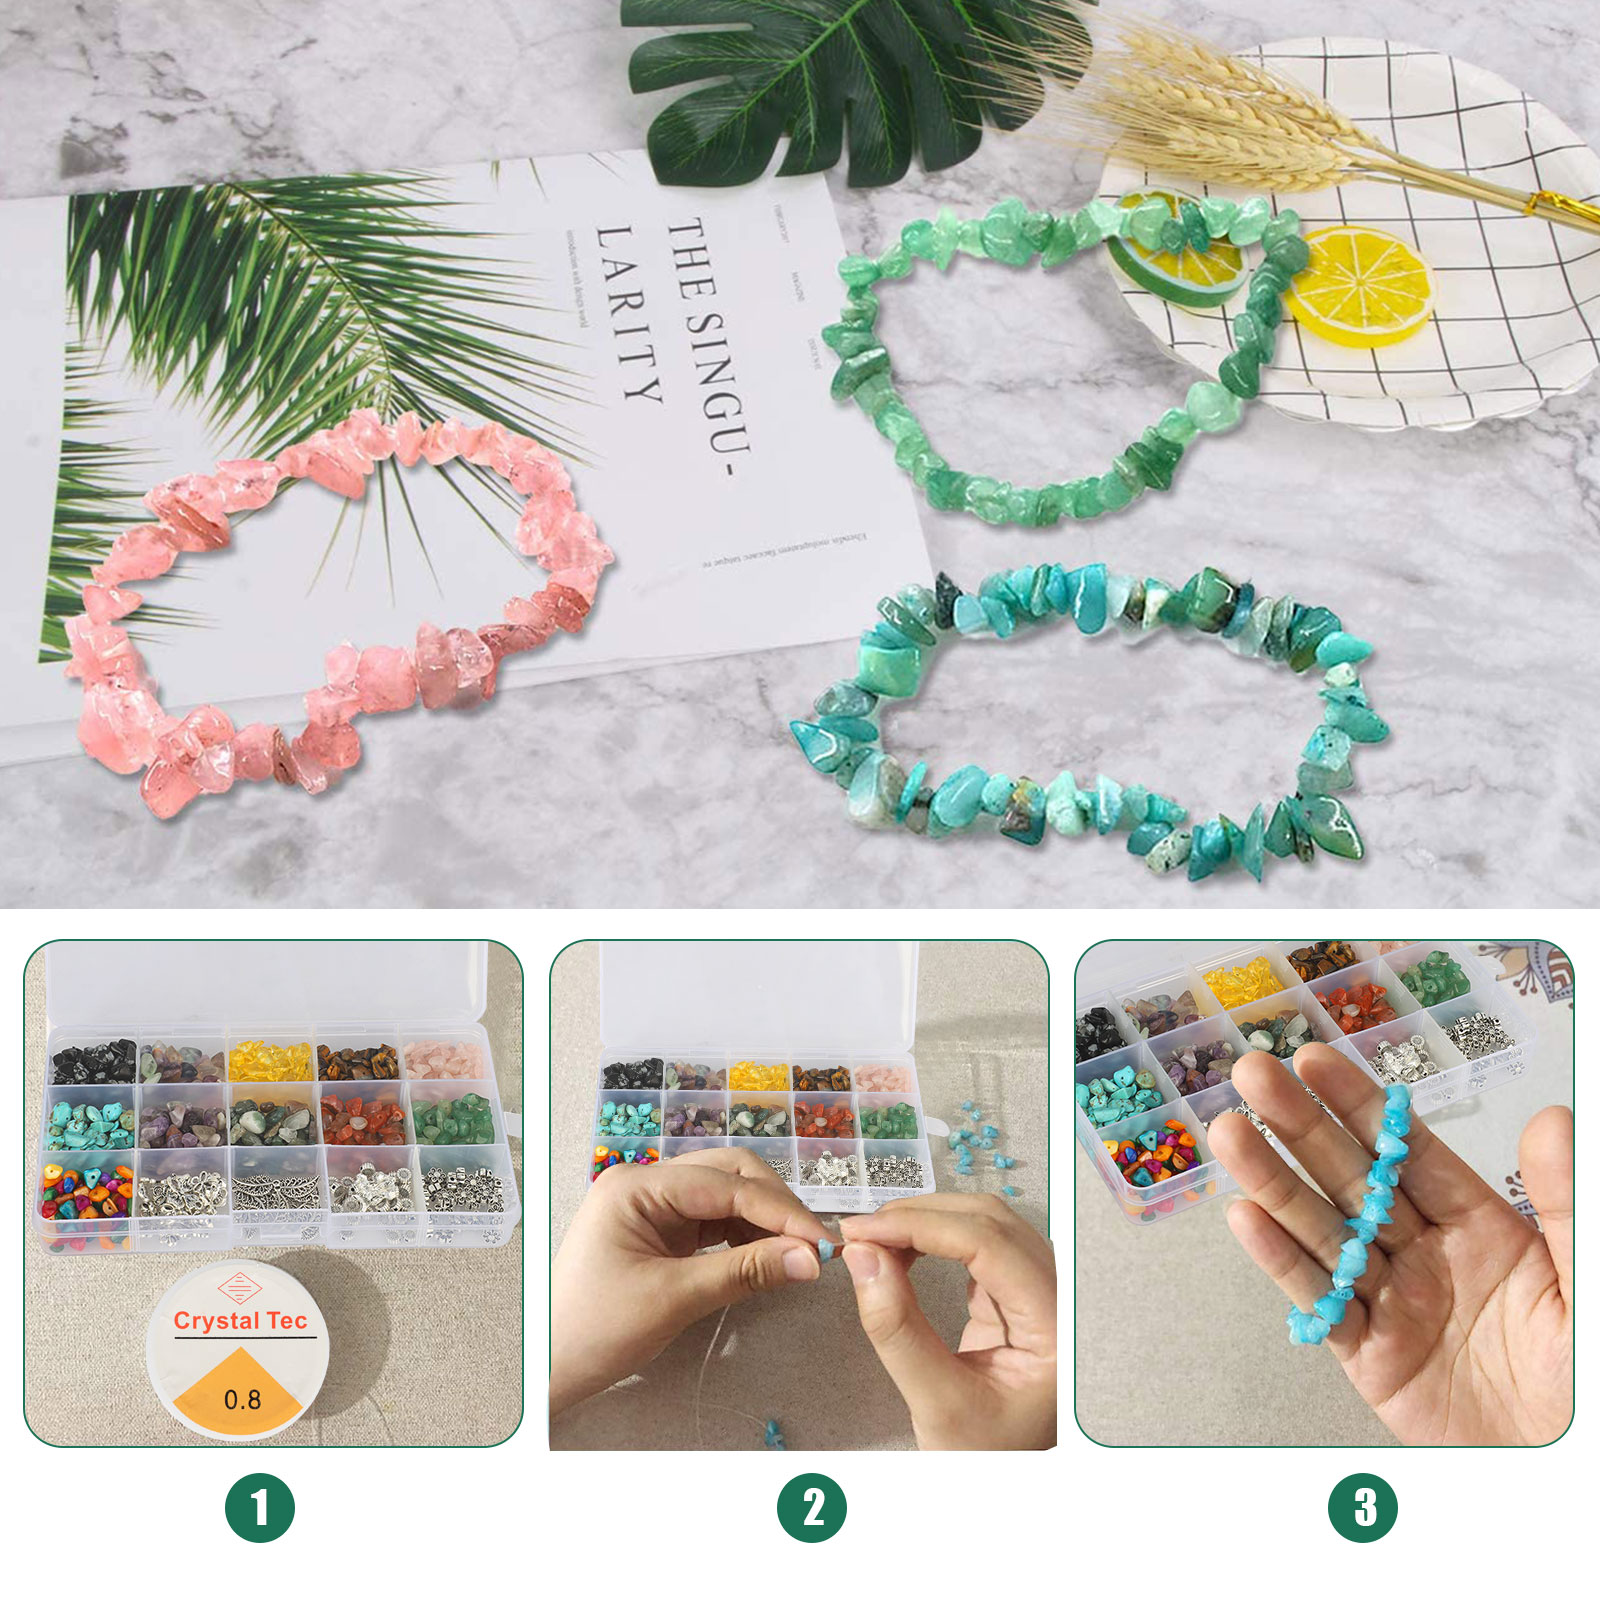 TSV 933pcs Natural Beads for Jewelry Making Kit, Irregular Chips Stone Gemstone Beads Kit with Earring Hooks Spacer Beads Pendants Charms Jump Rings for DIY Necklace Bracelet Earring Making - image 4 of 9